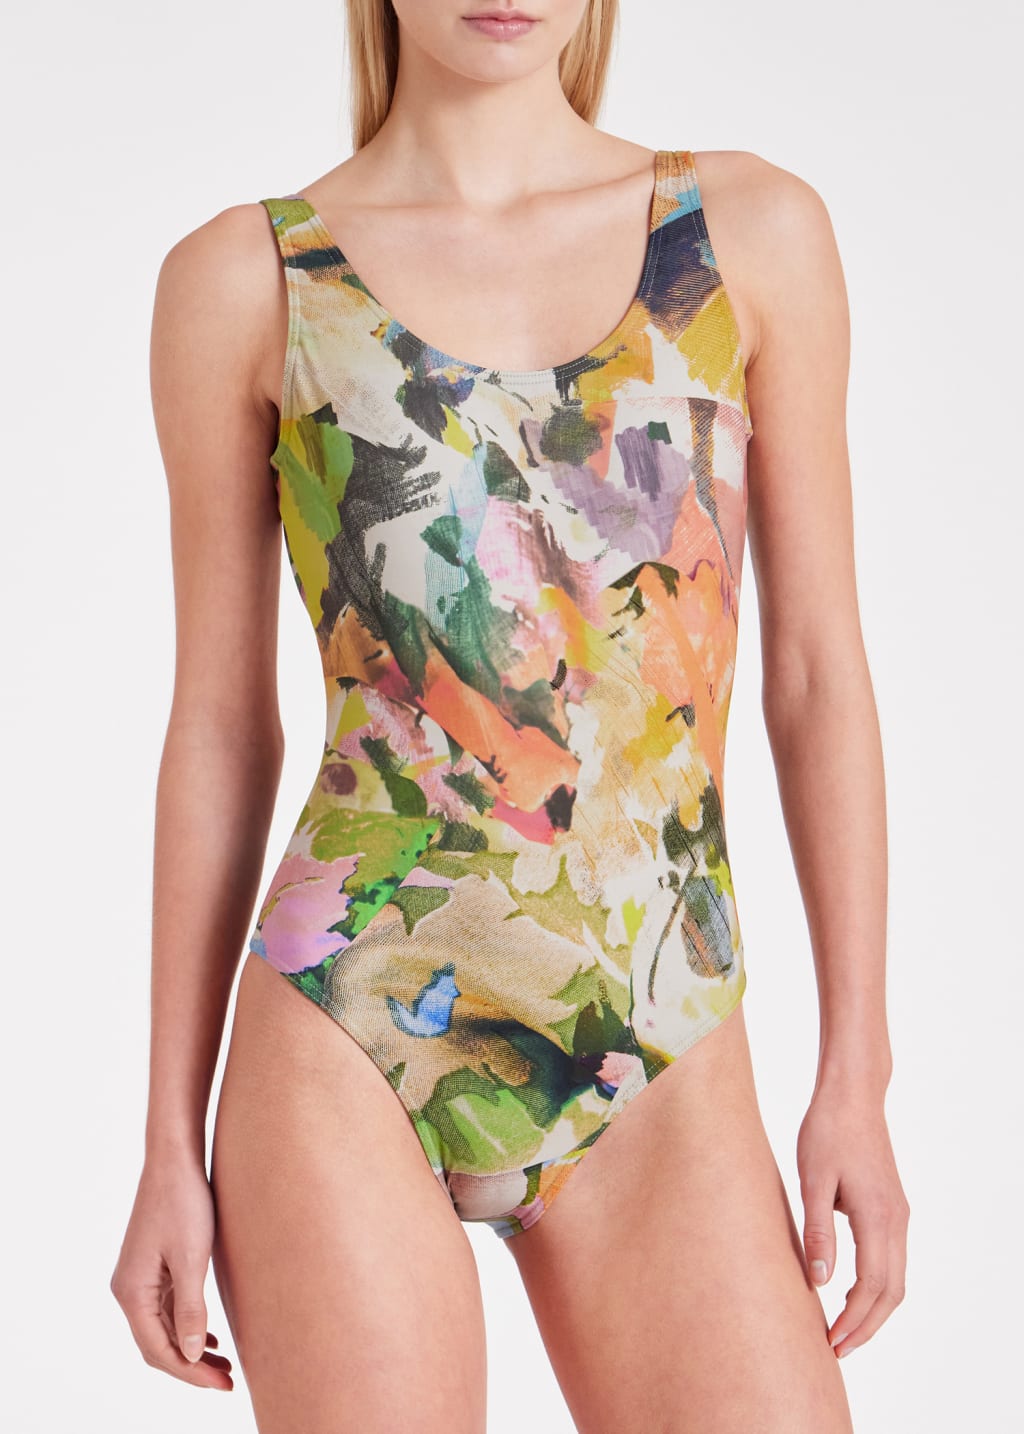 Model View - Women's 'Floral Collage' Swimsuit Paul Smith